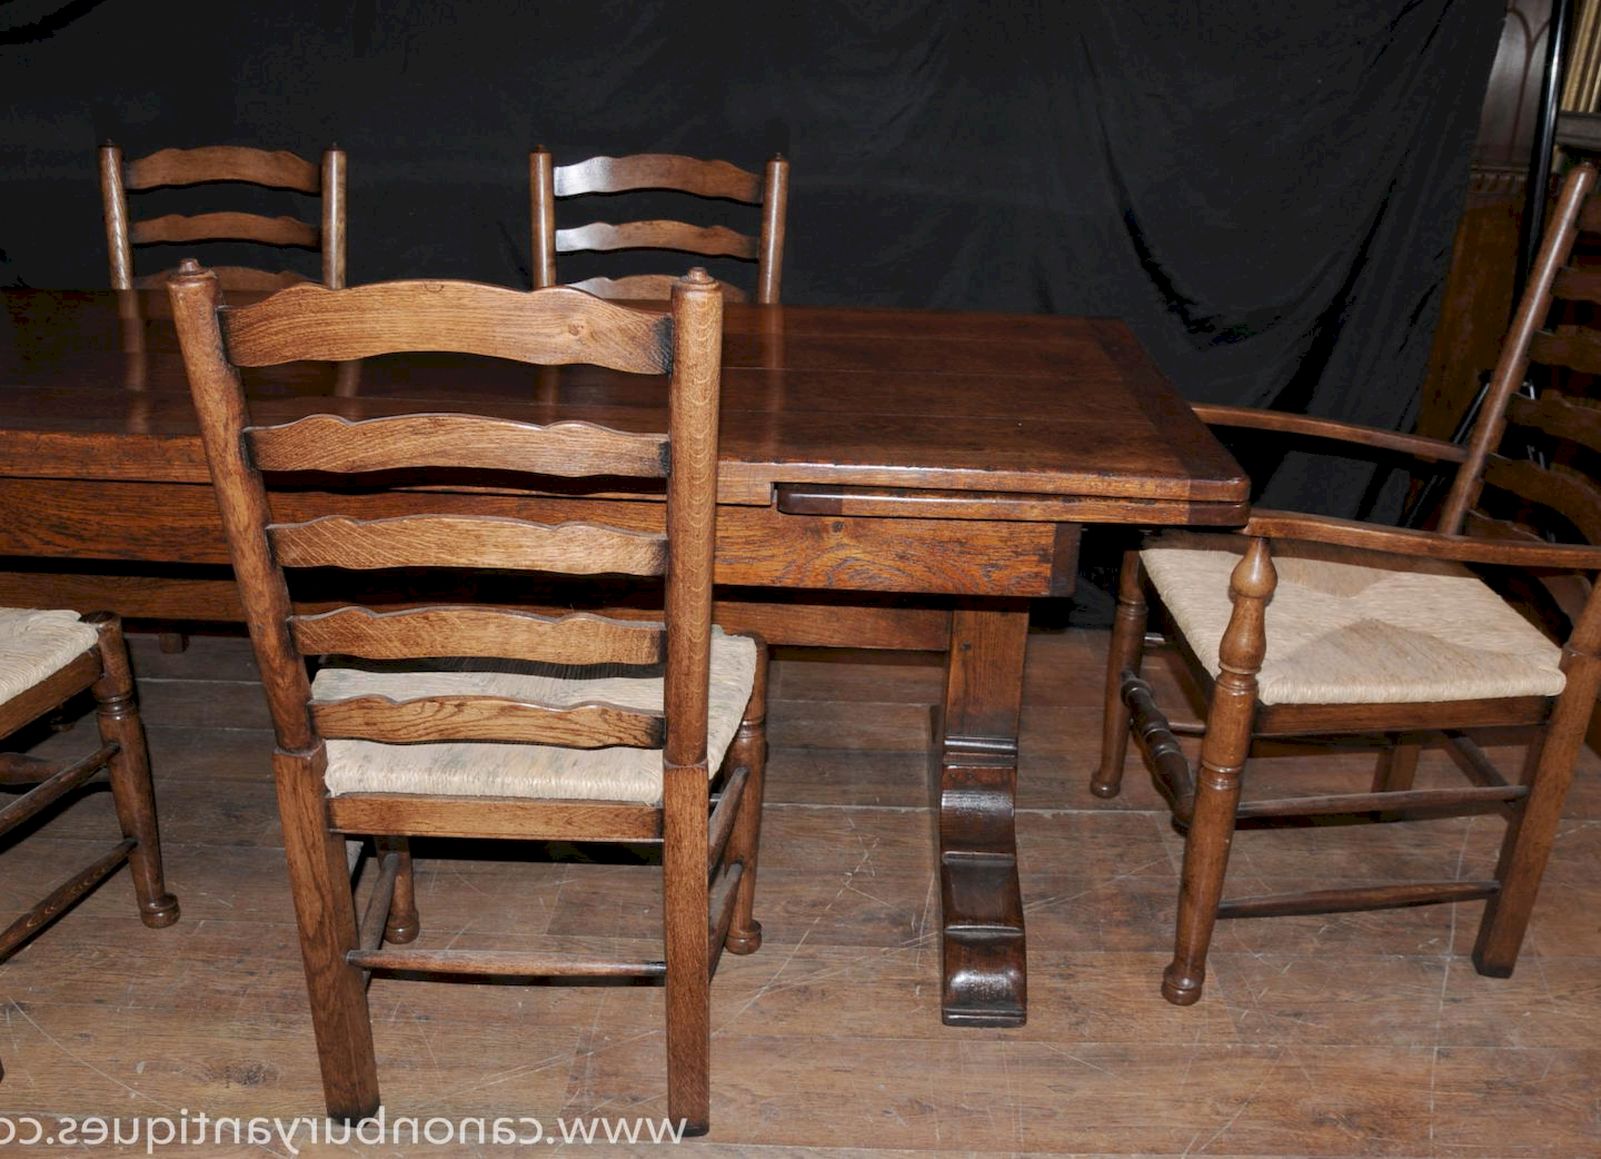 Farmhouse Kitchen Table And Chairs photo - 2